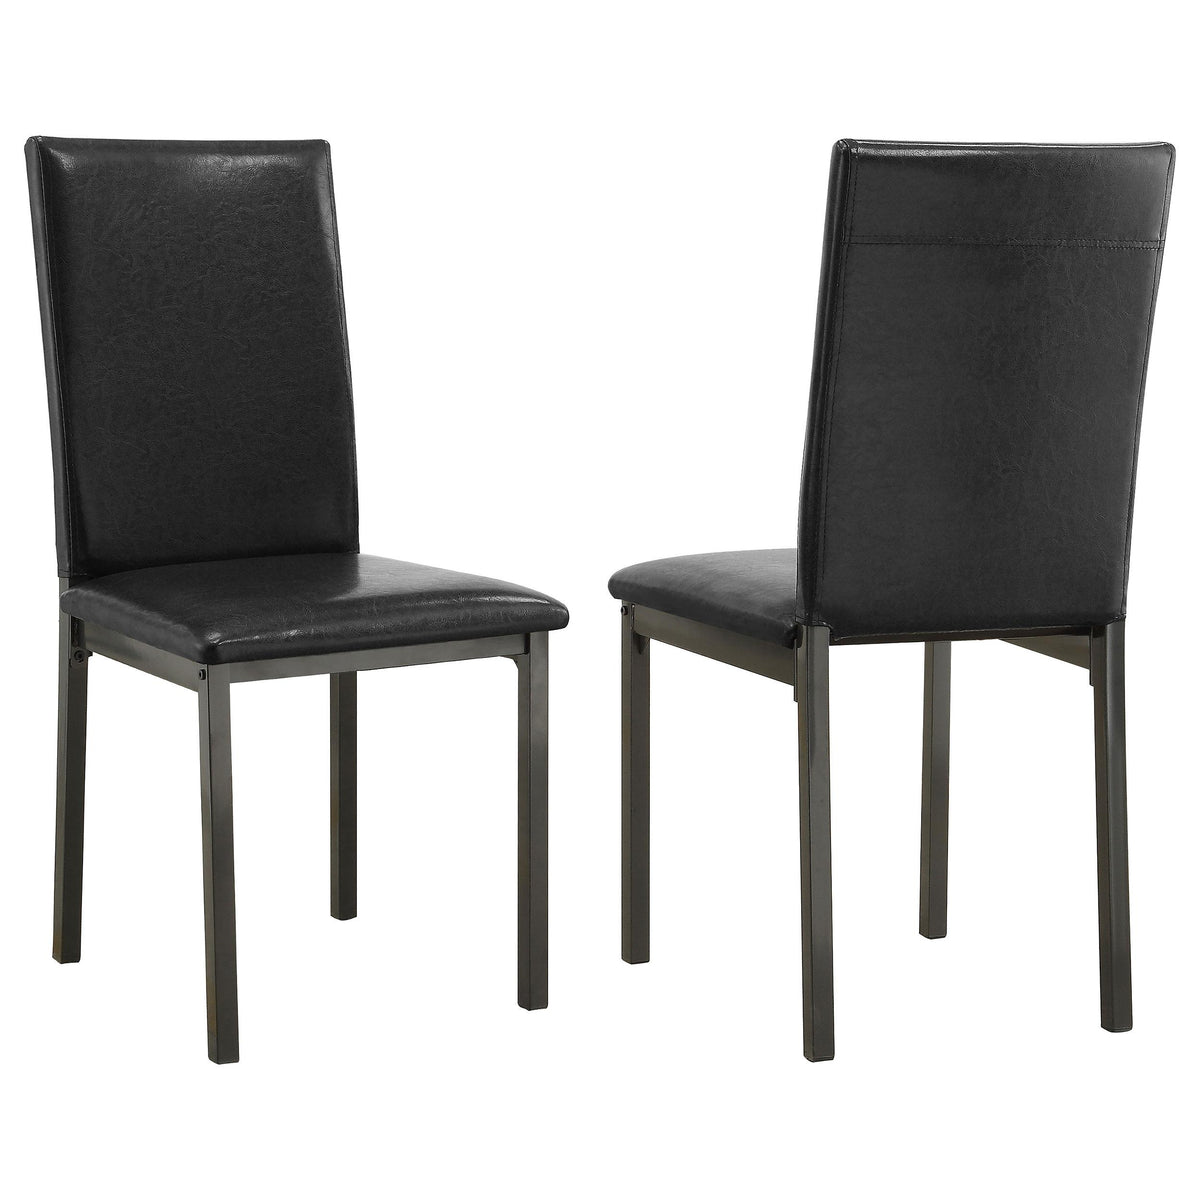 Garza Upholstered Dining Chairs Black (Set of 2)  Half Price Furniture